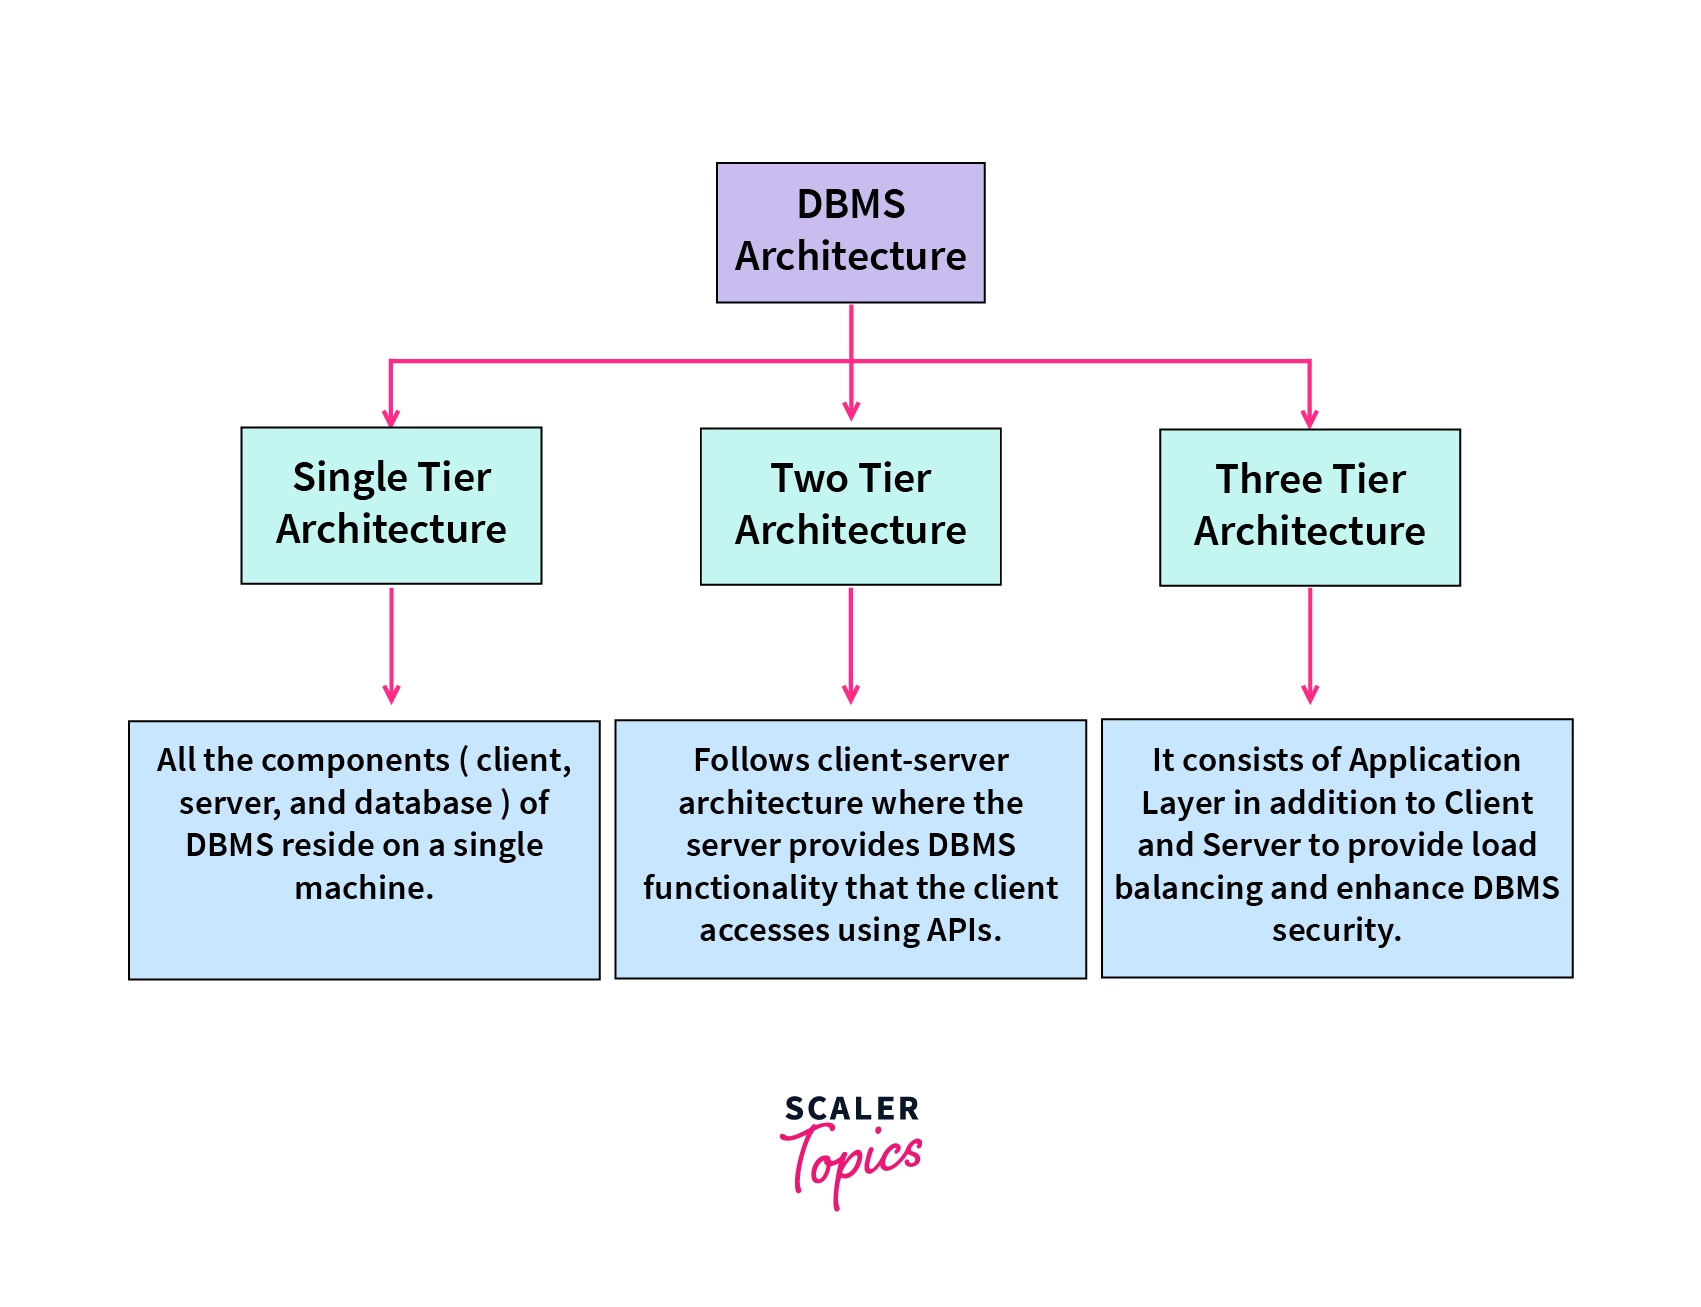 Types of DBMS Architecture